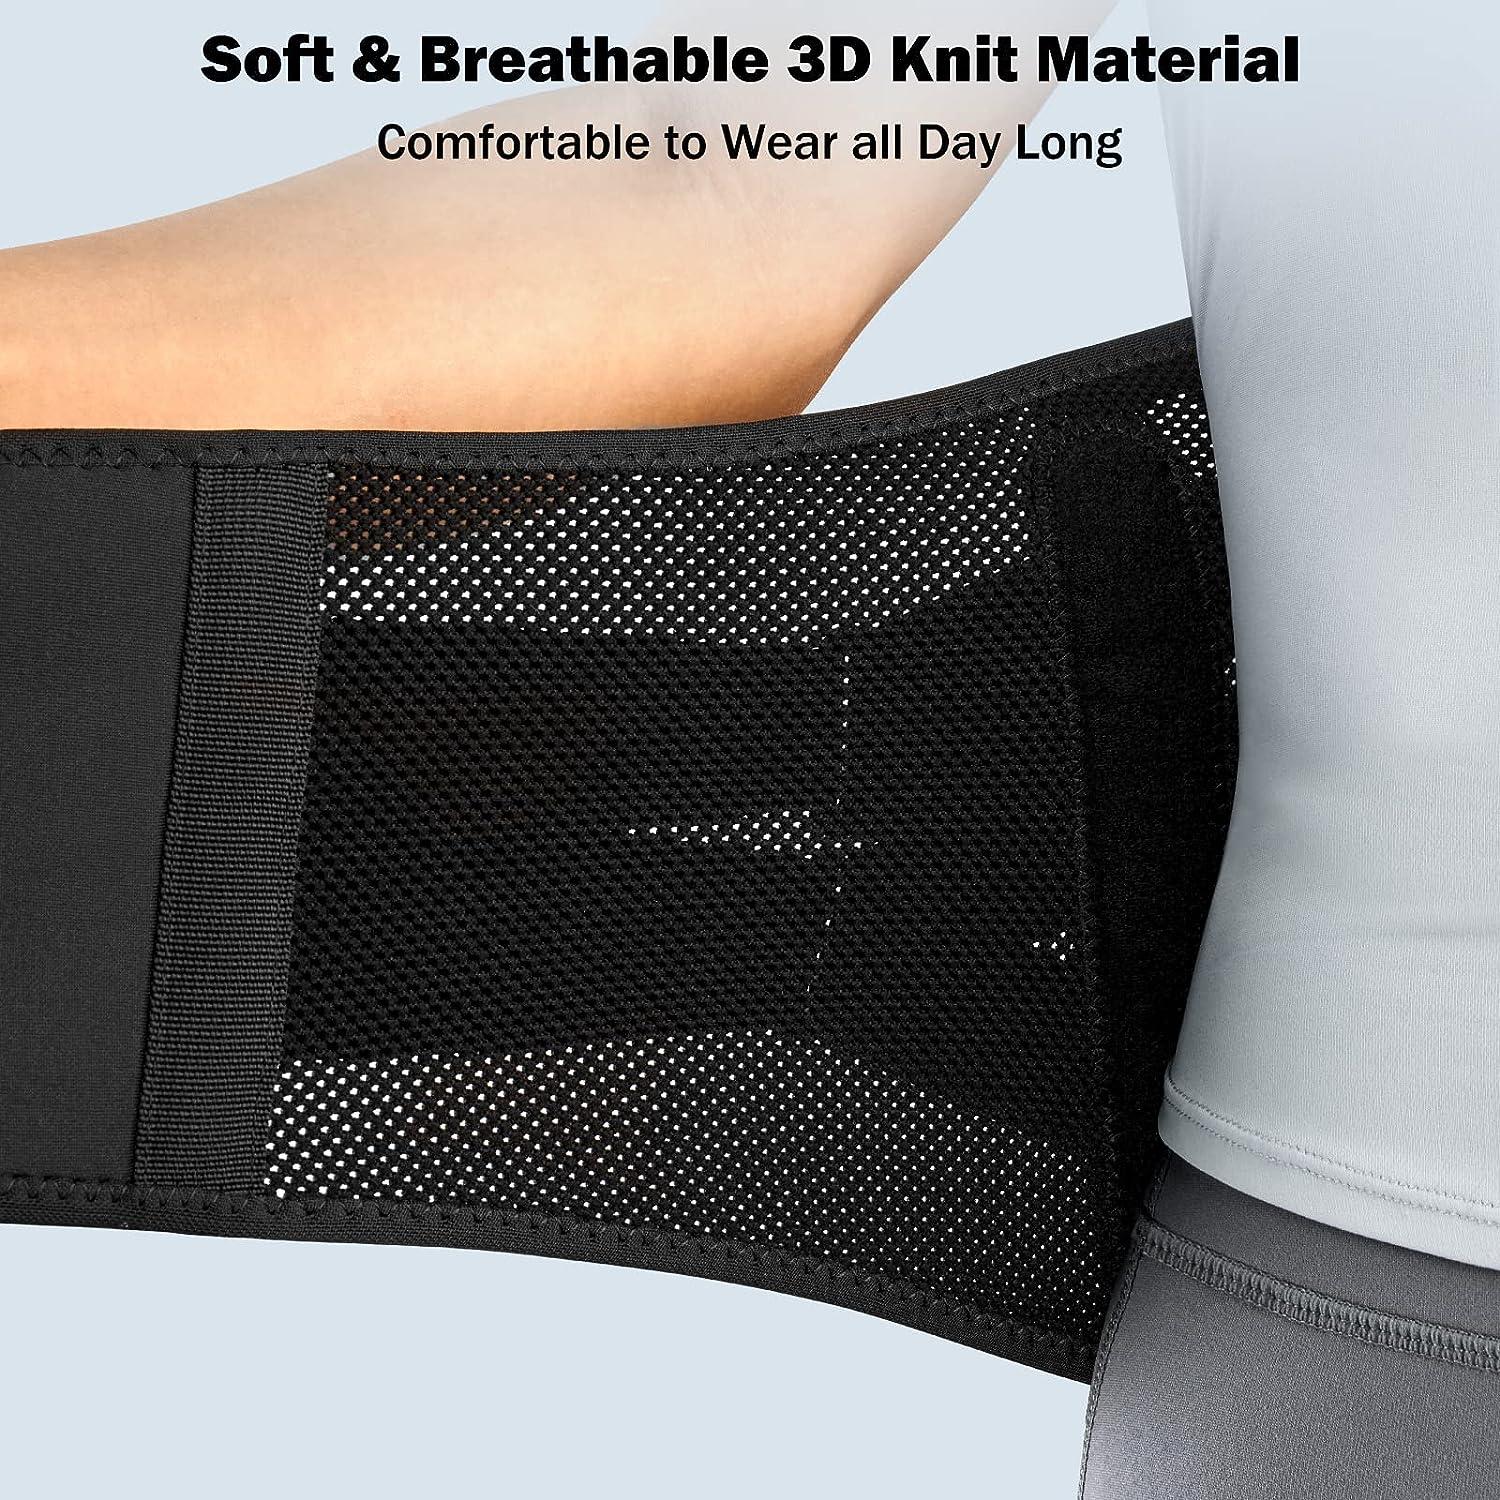 Waist Brace Support Belt Tourmaline Self-heating Magnetic Therapy